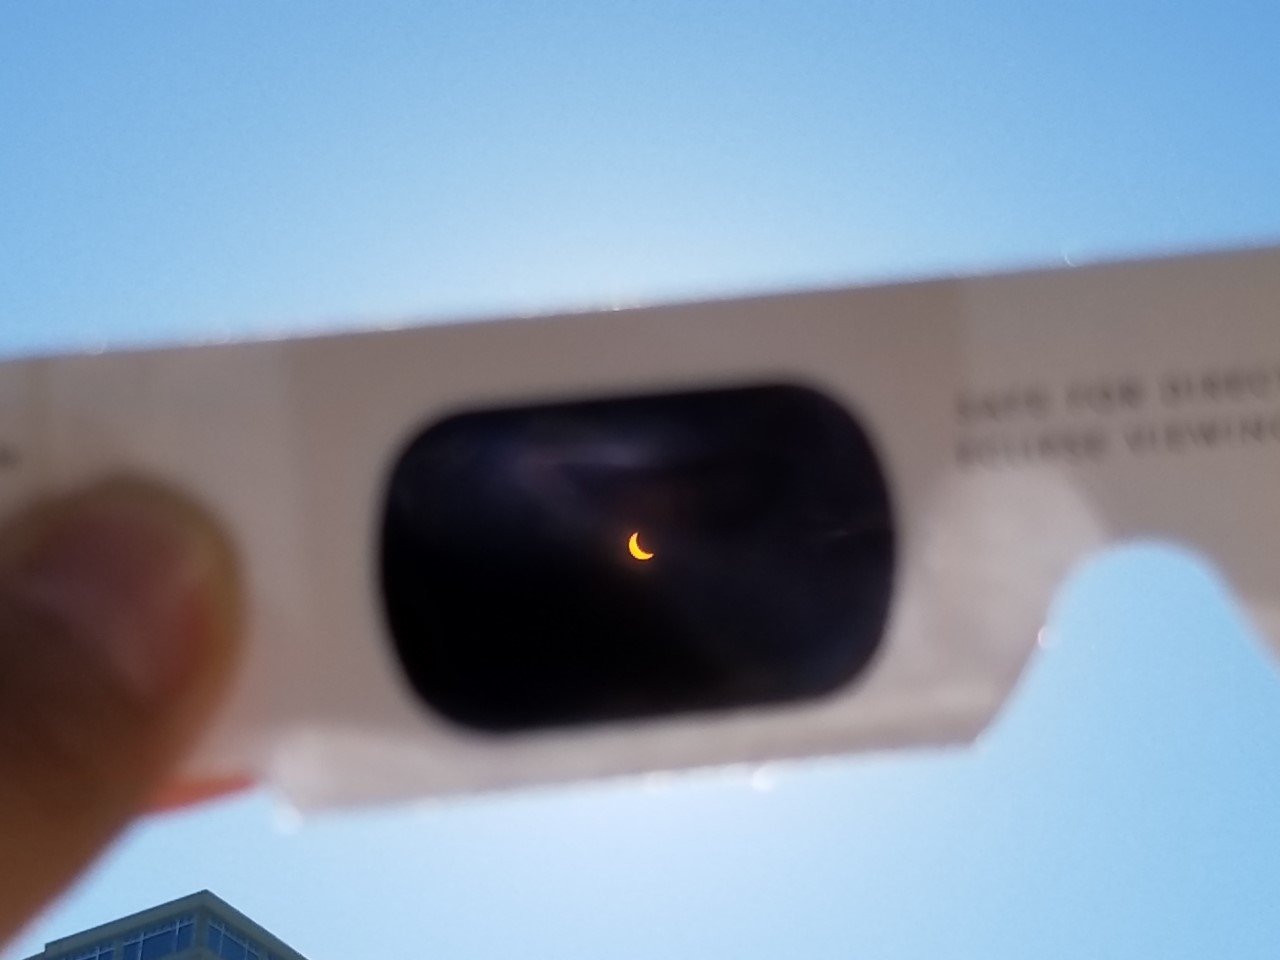 The eclipse through protective glasses